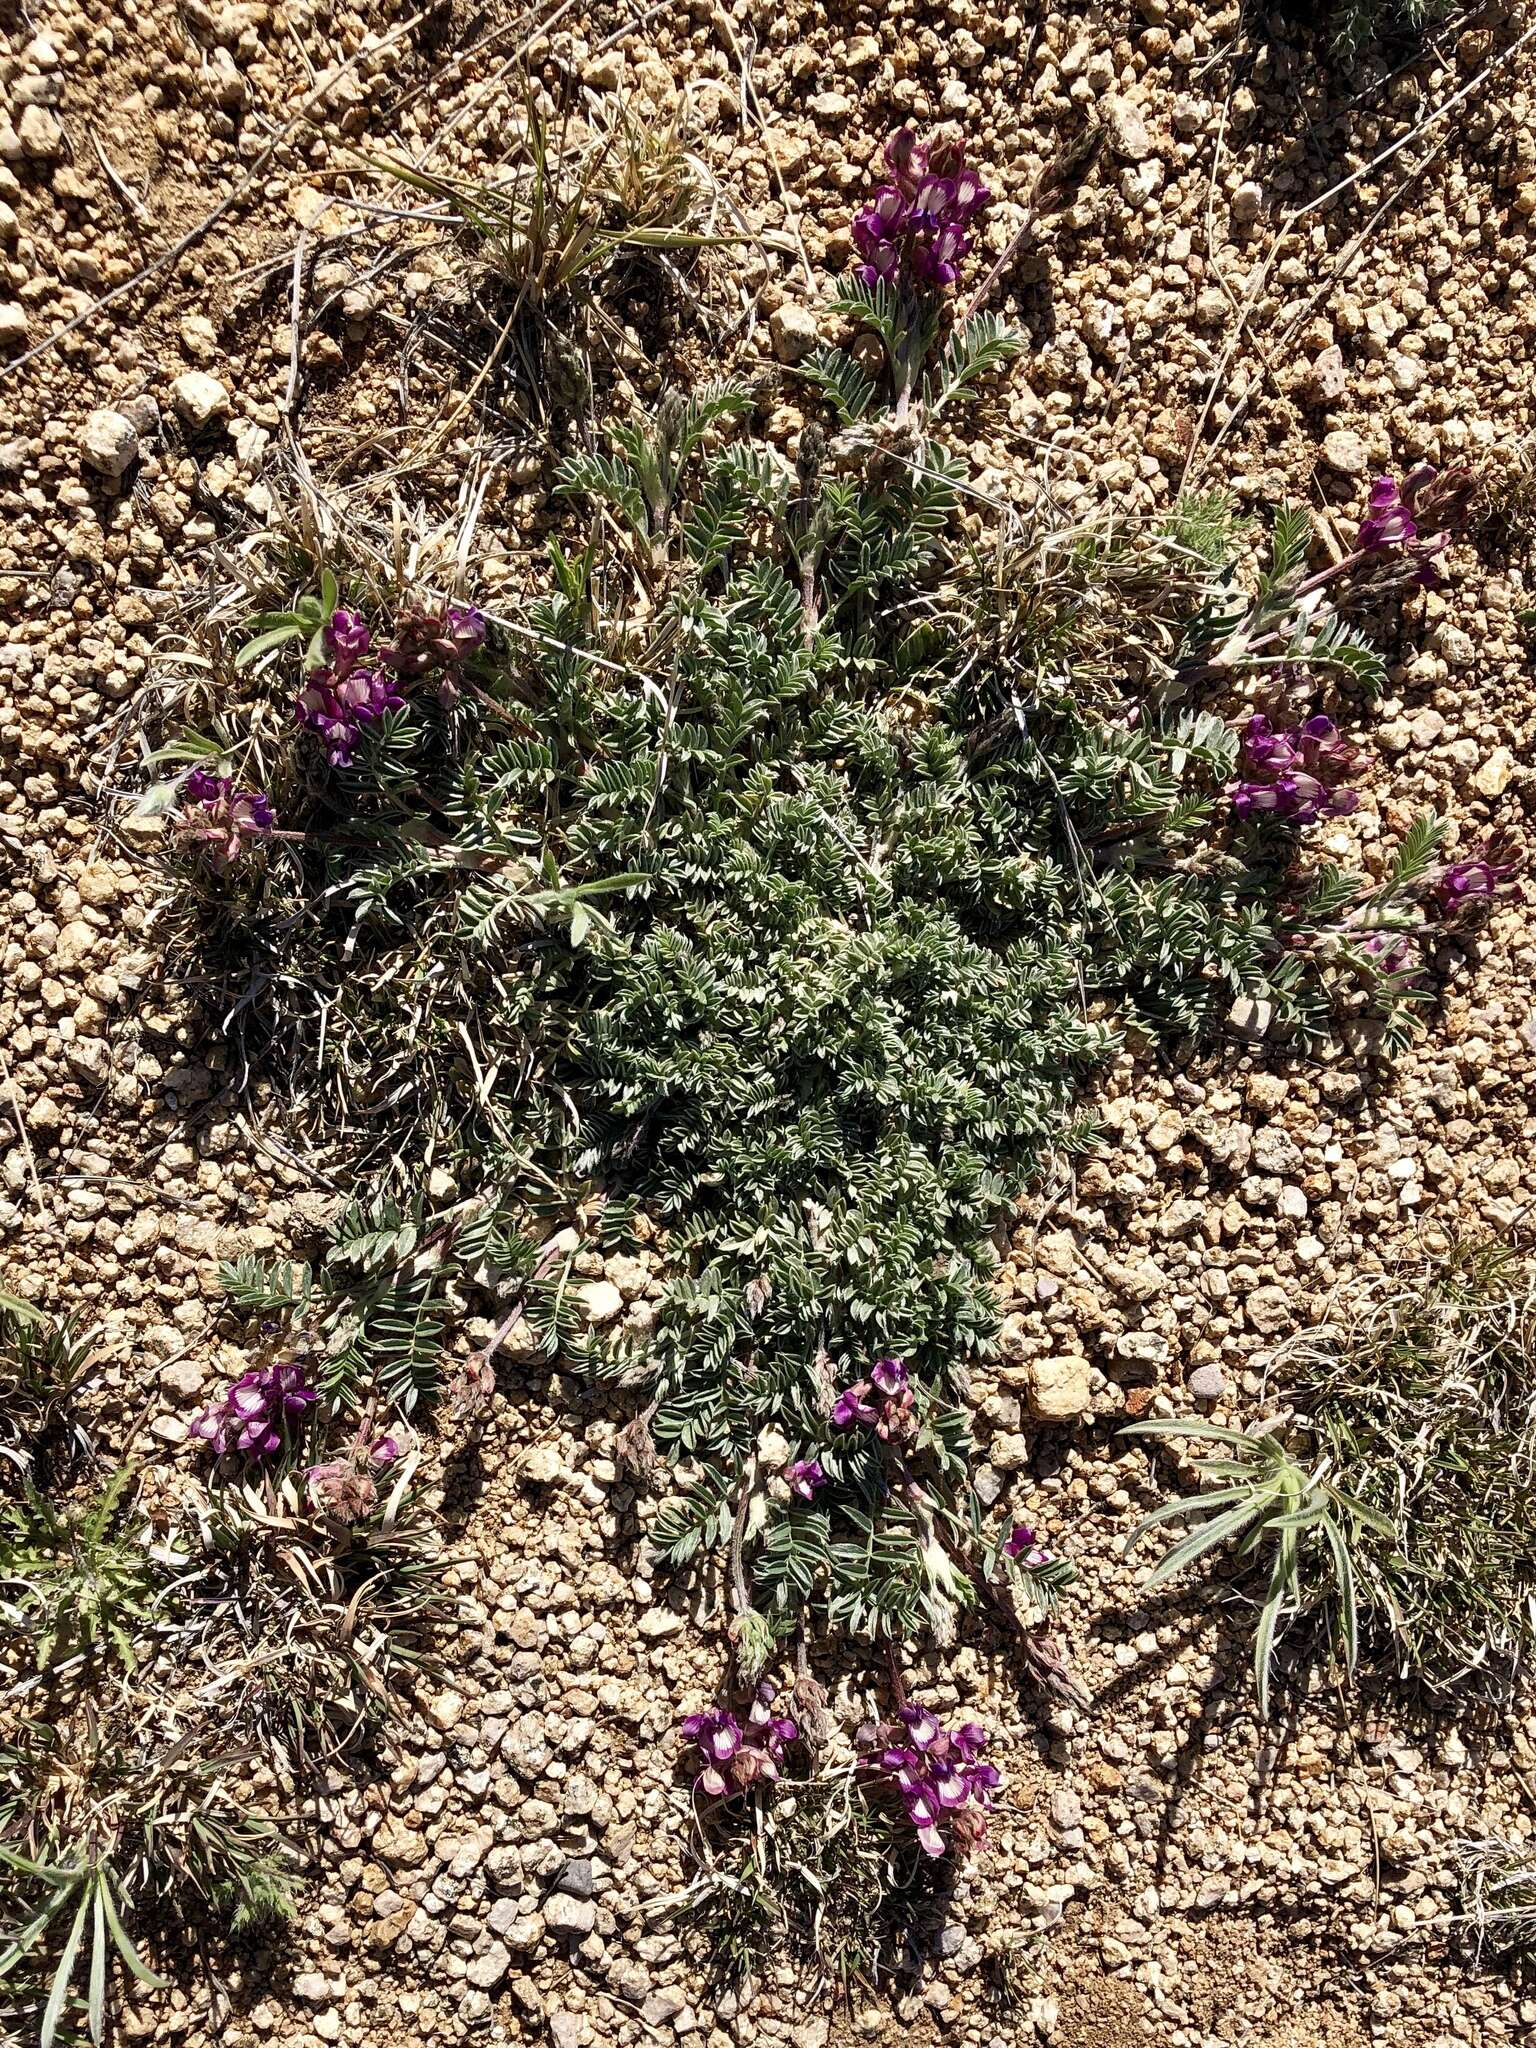 Image of groundcover milkvetch